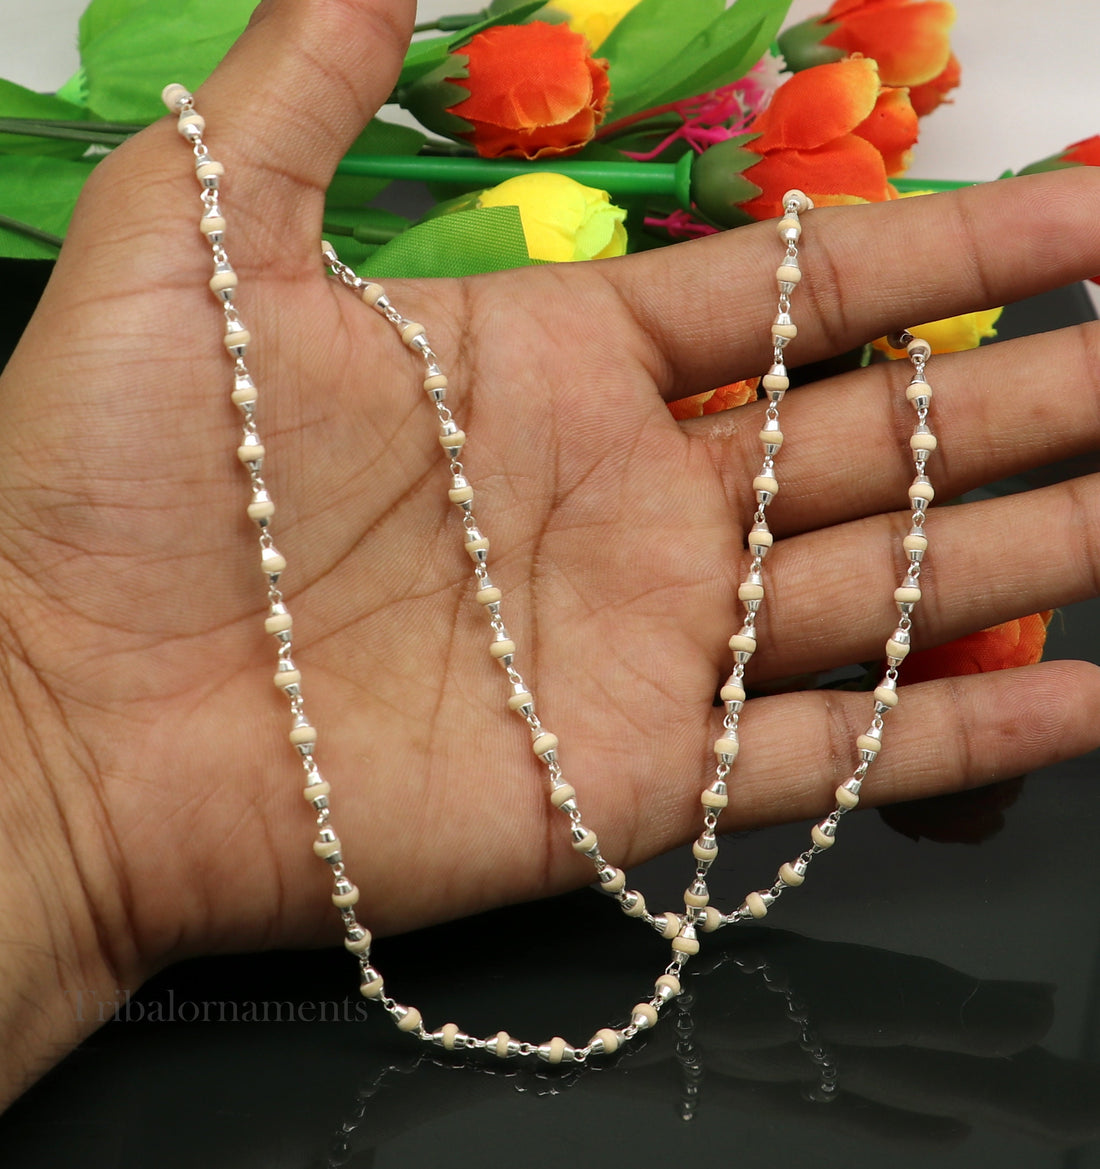 24" Sterling silver handmade wooden beads Holy basil rosary beads silver chain necklace unisex jewelry, tulsi mala customized necklace ch114 - TRIBAL ORNAMENTS